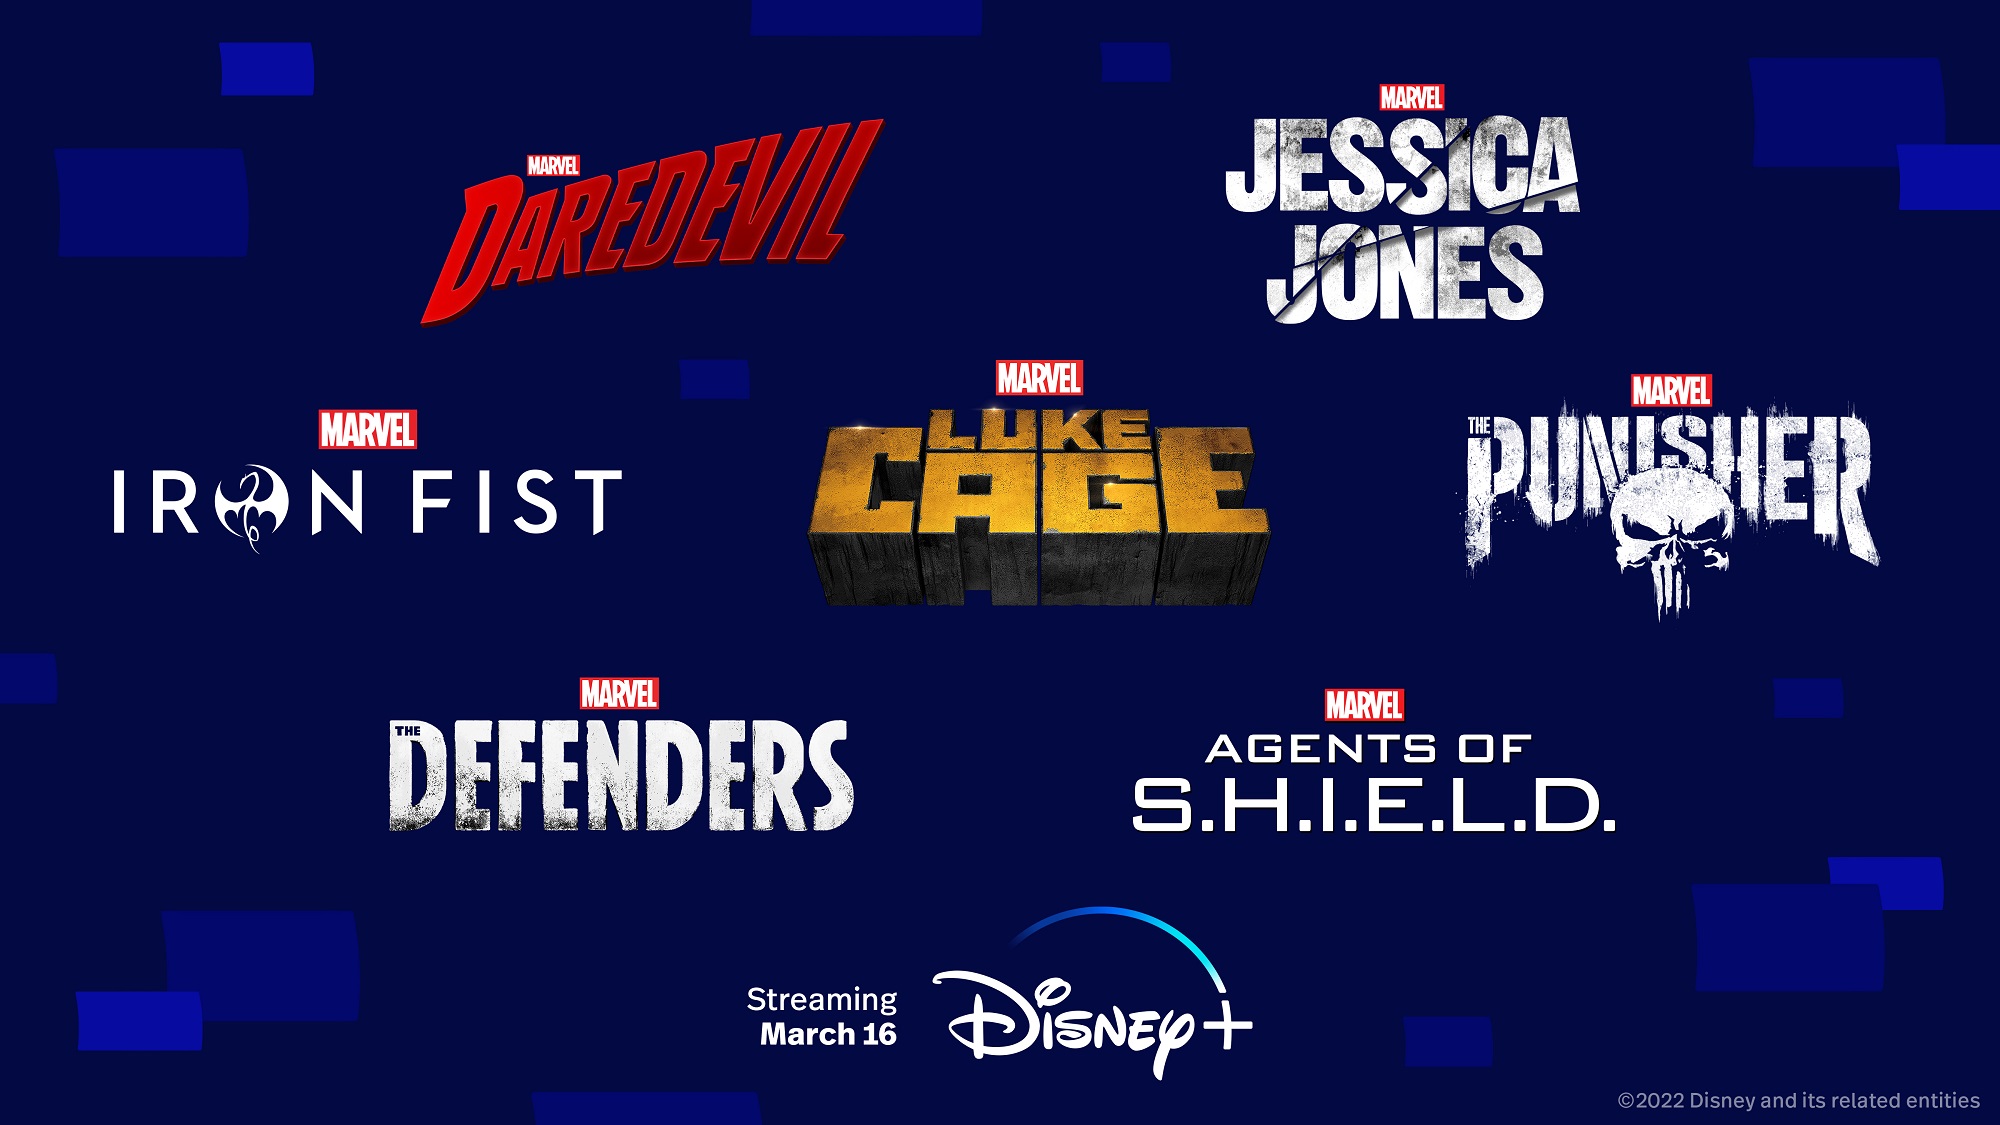 Marvel Netflix shows are coming to Disney Plus on March 16th BGR